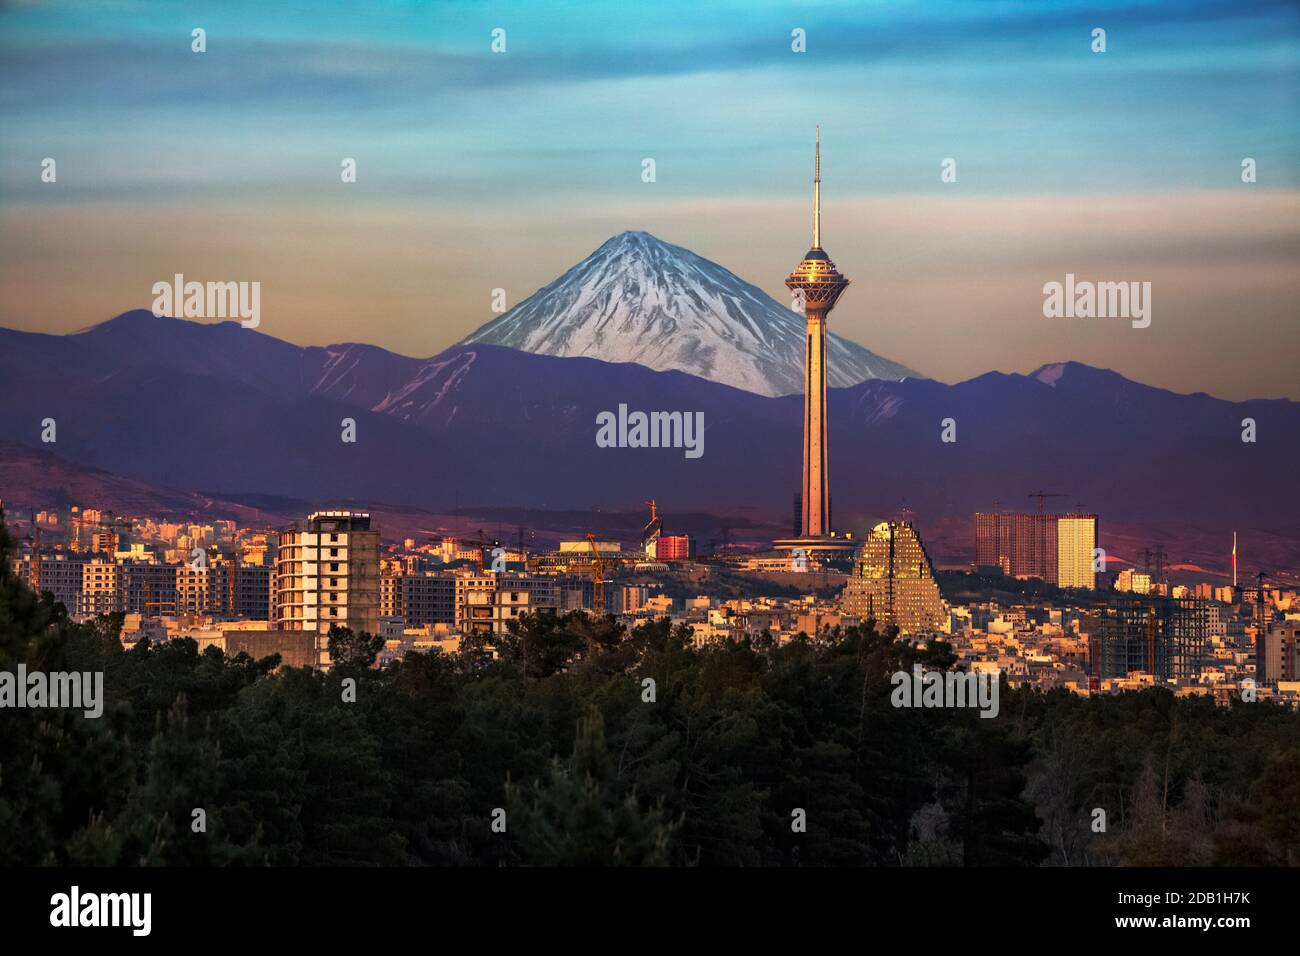 The view of Milad Tower and Mount Damavand in Tehran. Milad Tower is the sixth-tallest tower and the 24th-tallest freestanding structure in the world. Stock Photo